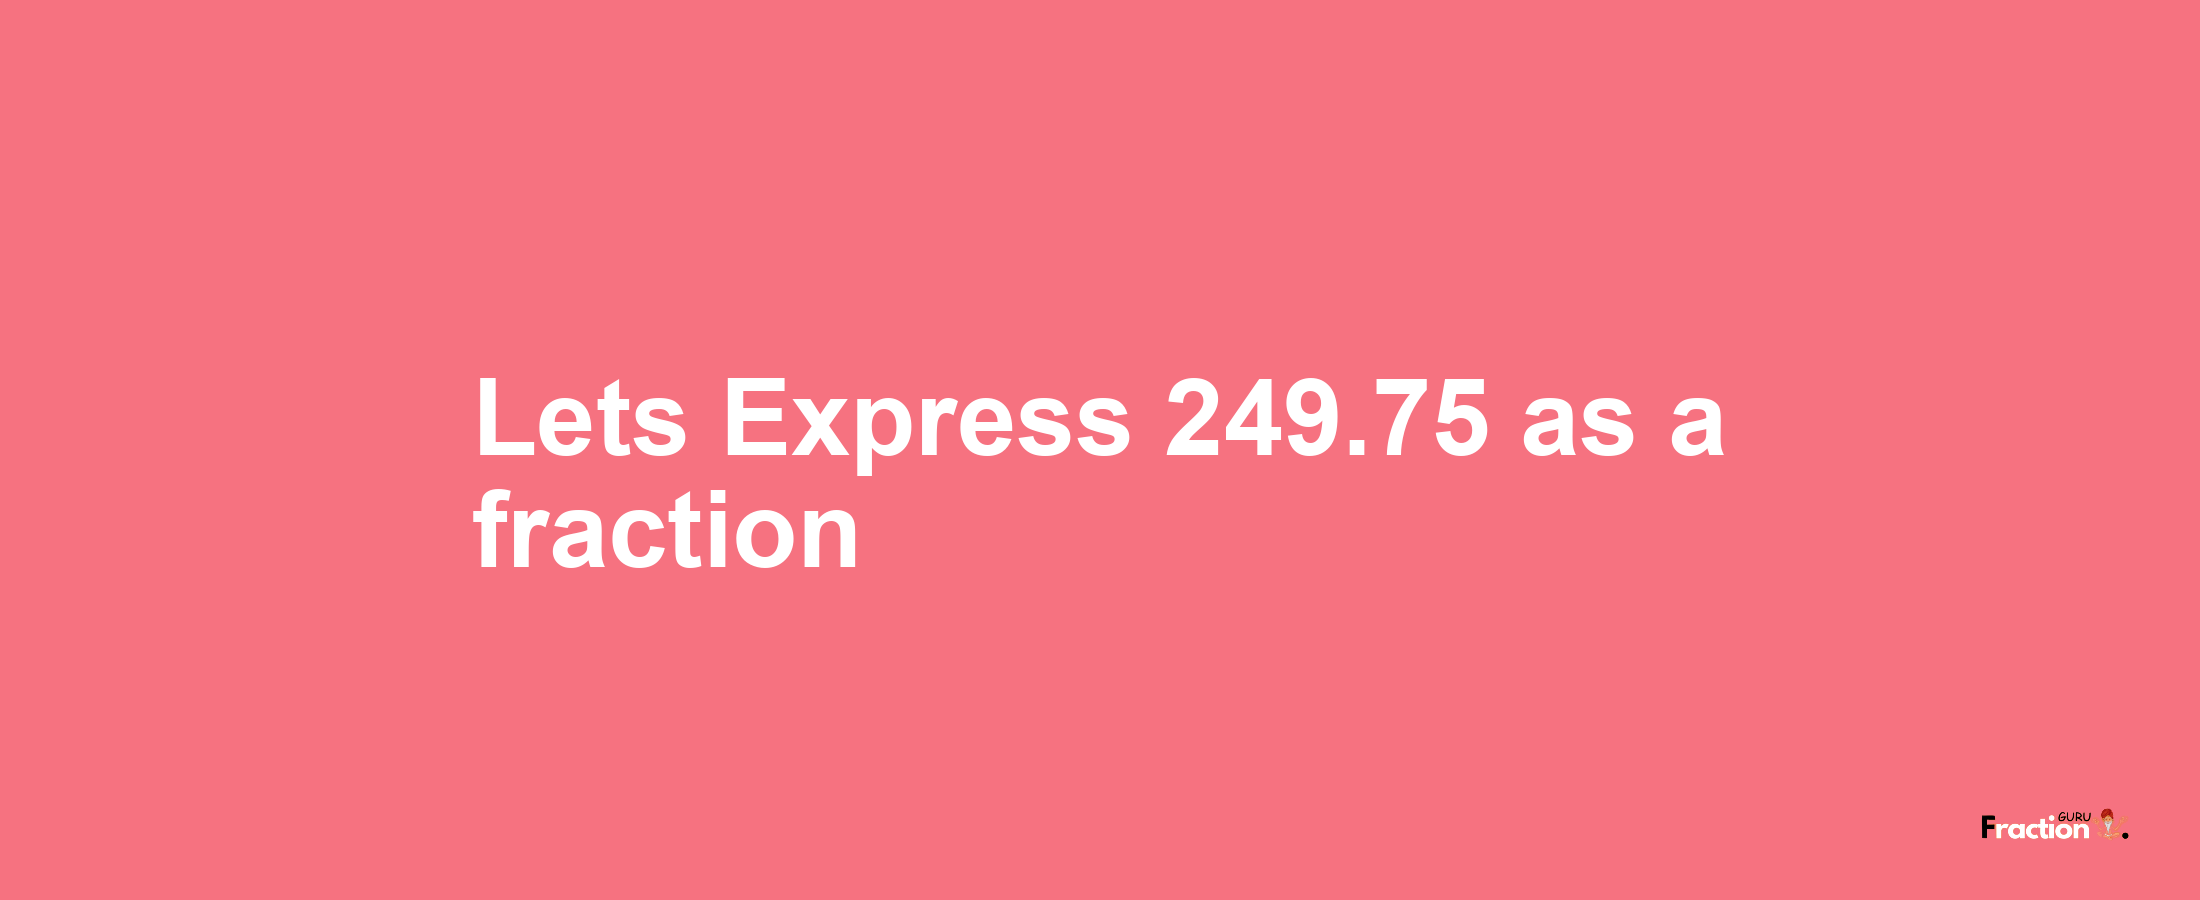 Lets Express 249.75 as afraction